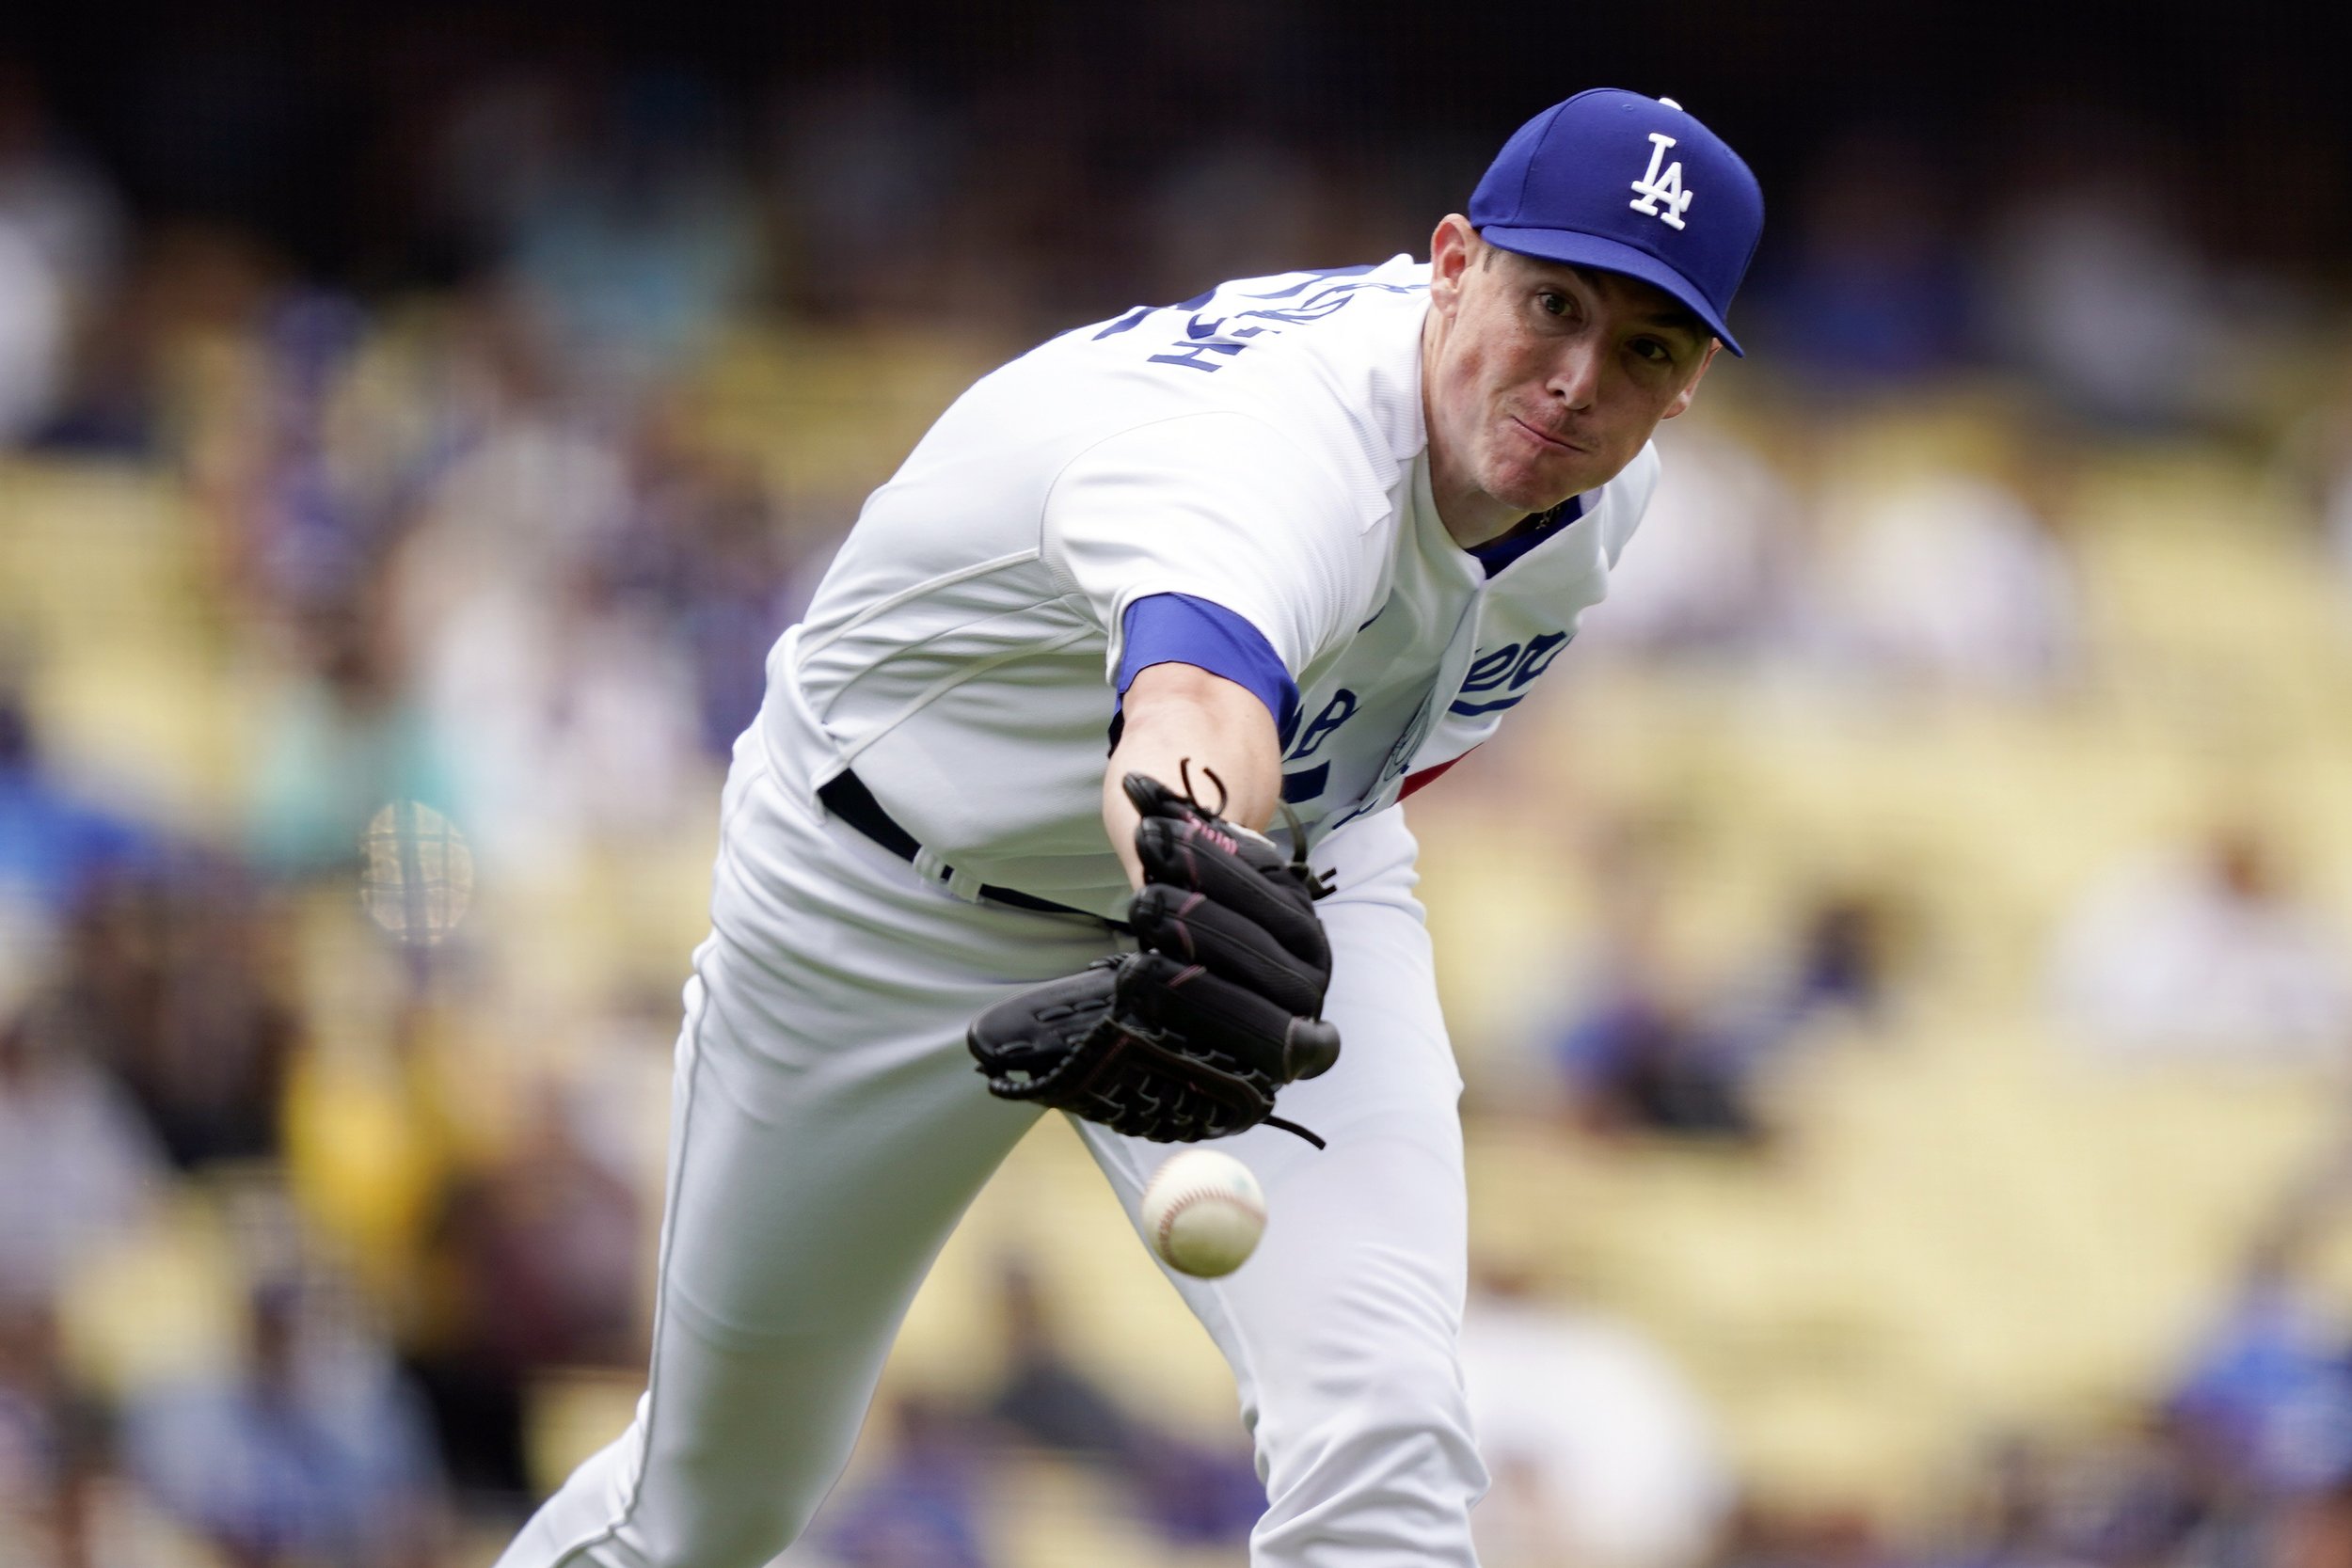  Los Angeles Dodgers relief pitcher Ryan Yarbrough attempts to field a grounder by Miami Marlins' Luis Arraez during the eighth inning in the first baseball game of a doubleheader, Saturday, Aug. 19, 2023, in Los Angeles. Arraez was out at first afte